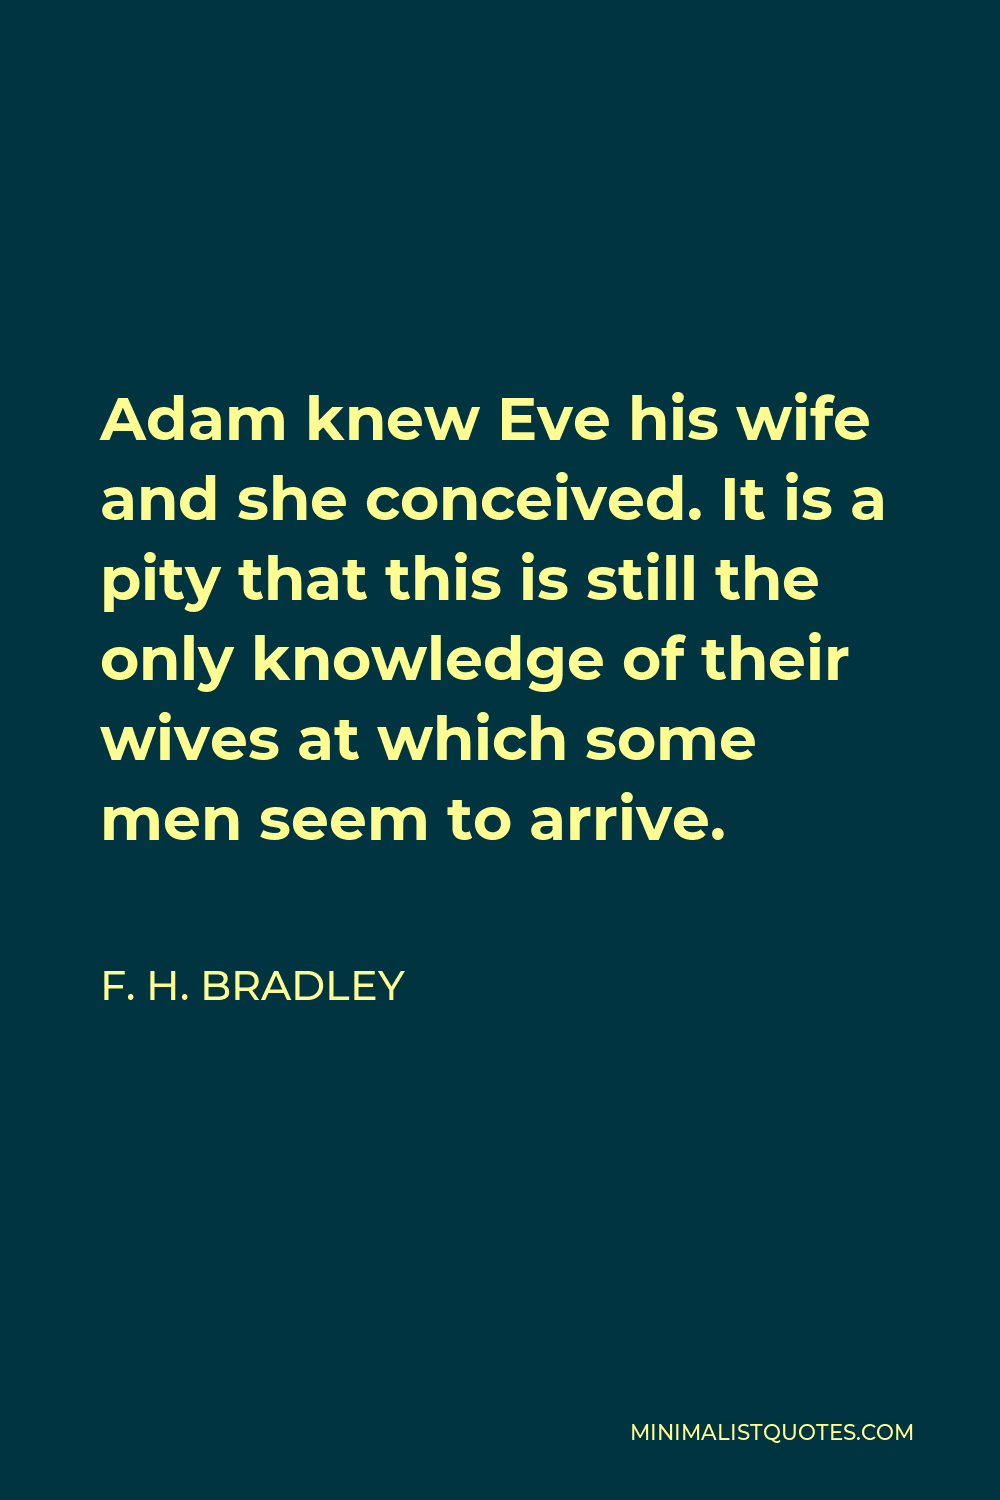 F. H. Bradley Quote - Adam knew Eve his wife and she conceived. It is a pity that this is still the only knowledge of their wives at which some men seem to arrive.